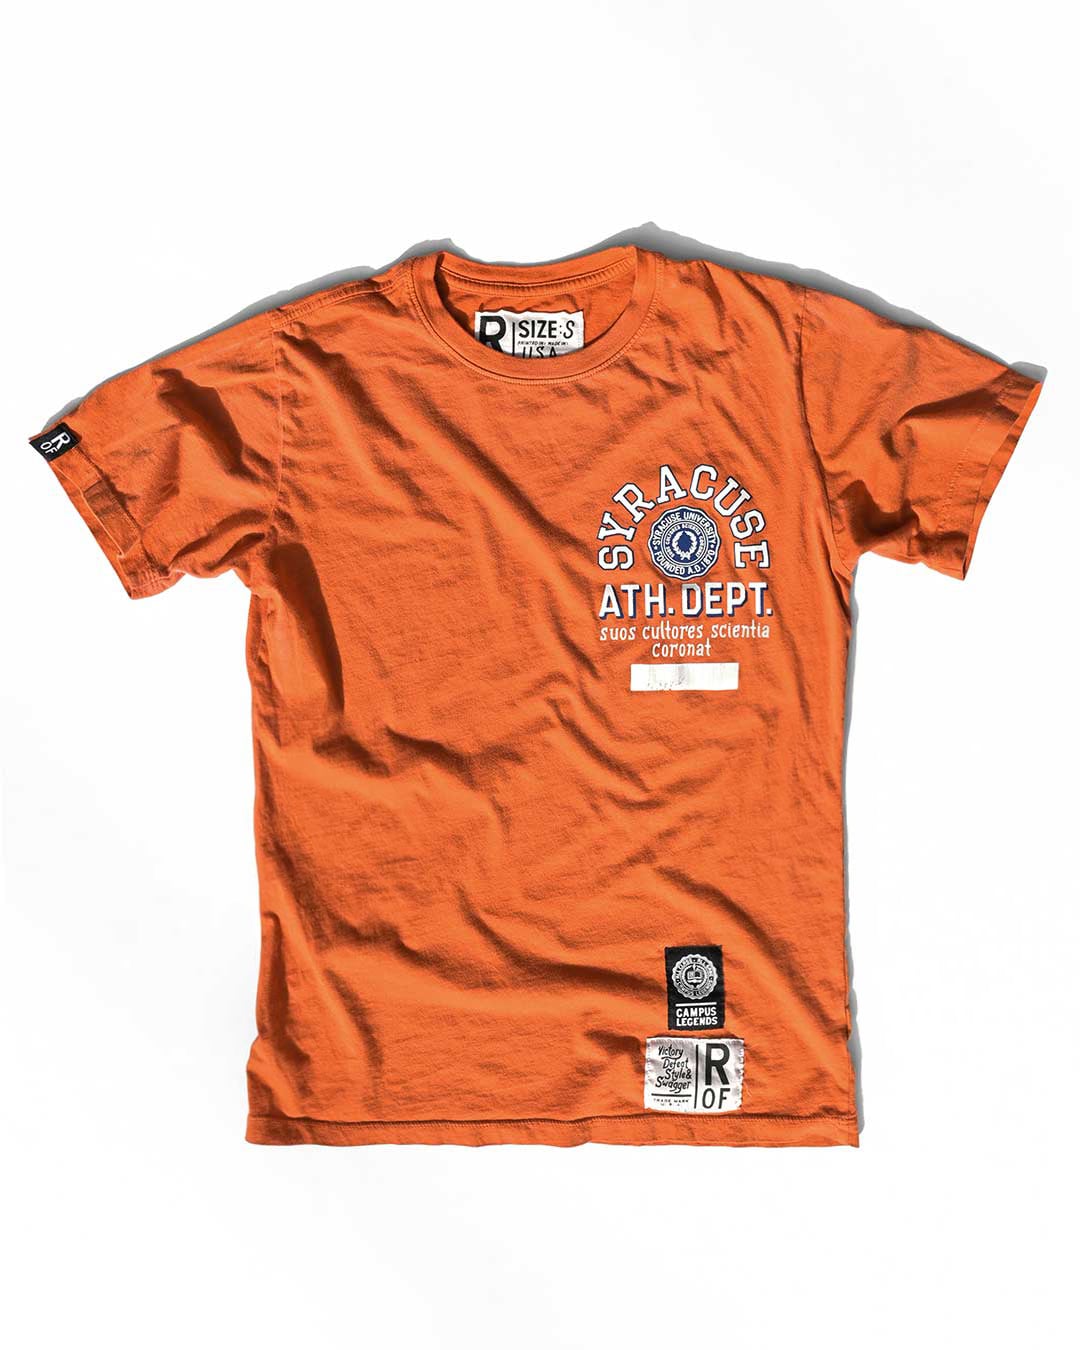 Syracuse Ath. Dept. Orange Tee - Roots of Fight Canada